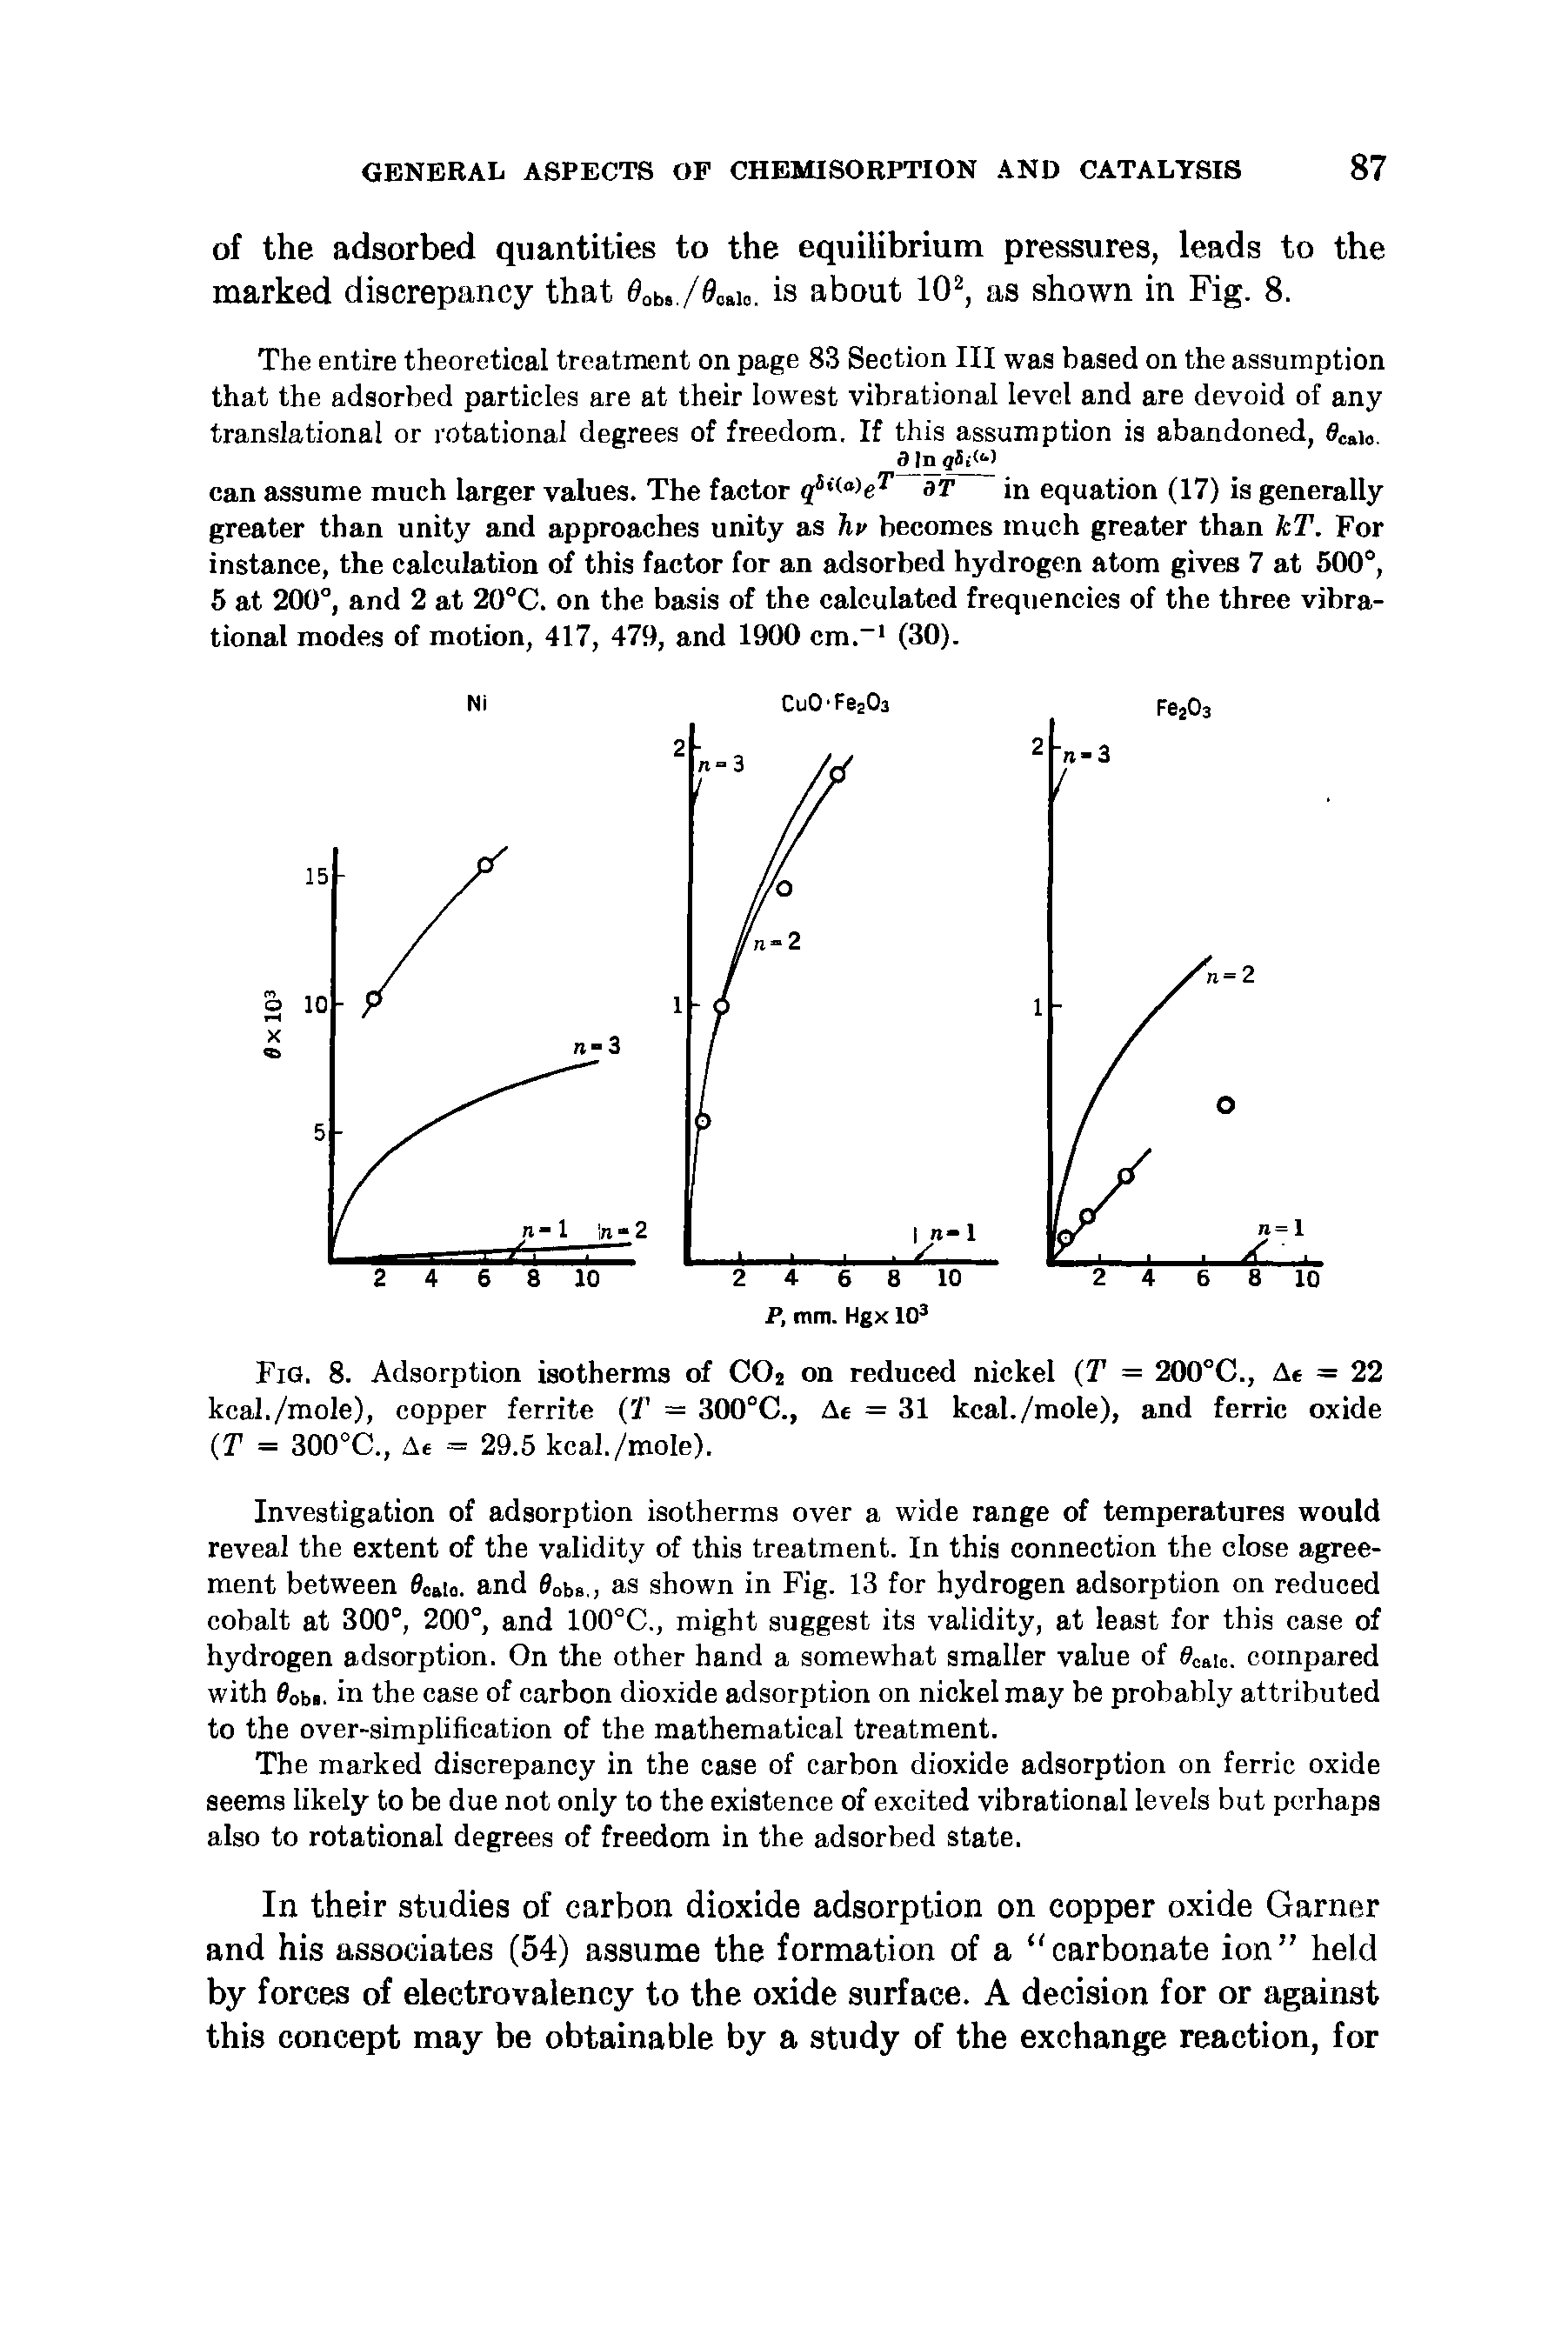 Fig. 8. Adsorption isotherms of CO2 on reduced nickel (T = 200°C., Ae = 22 kcal./mole), copper ferrite (T = 300°C., Ae = 31 kcal./mole), and ferric oxide (T = 300°C., Ae = 29.5 kcal./mole).